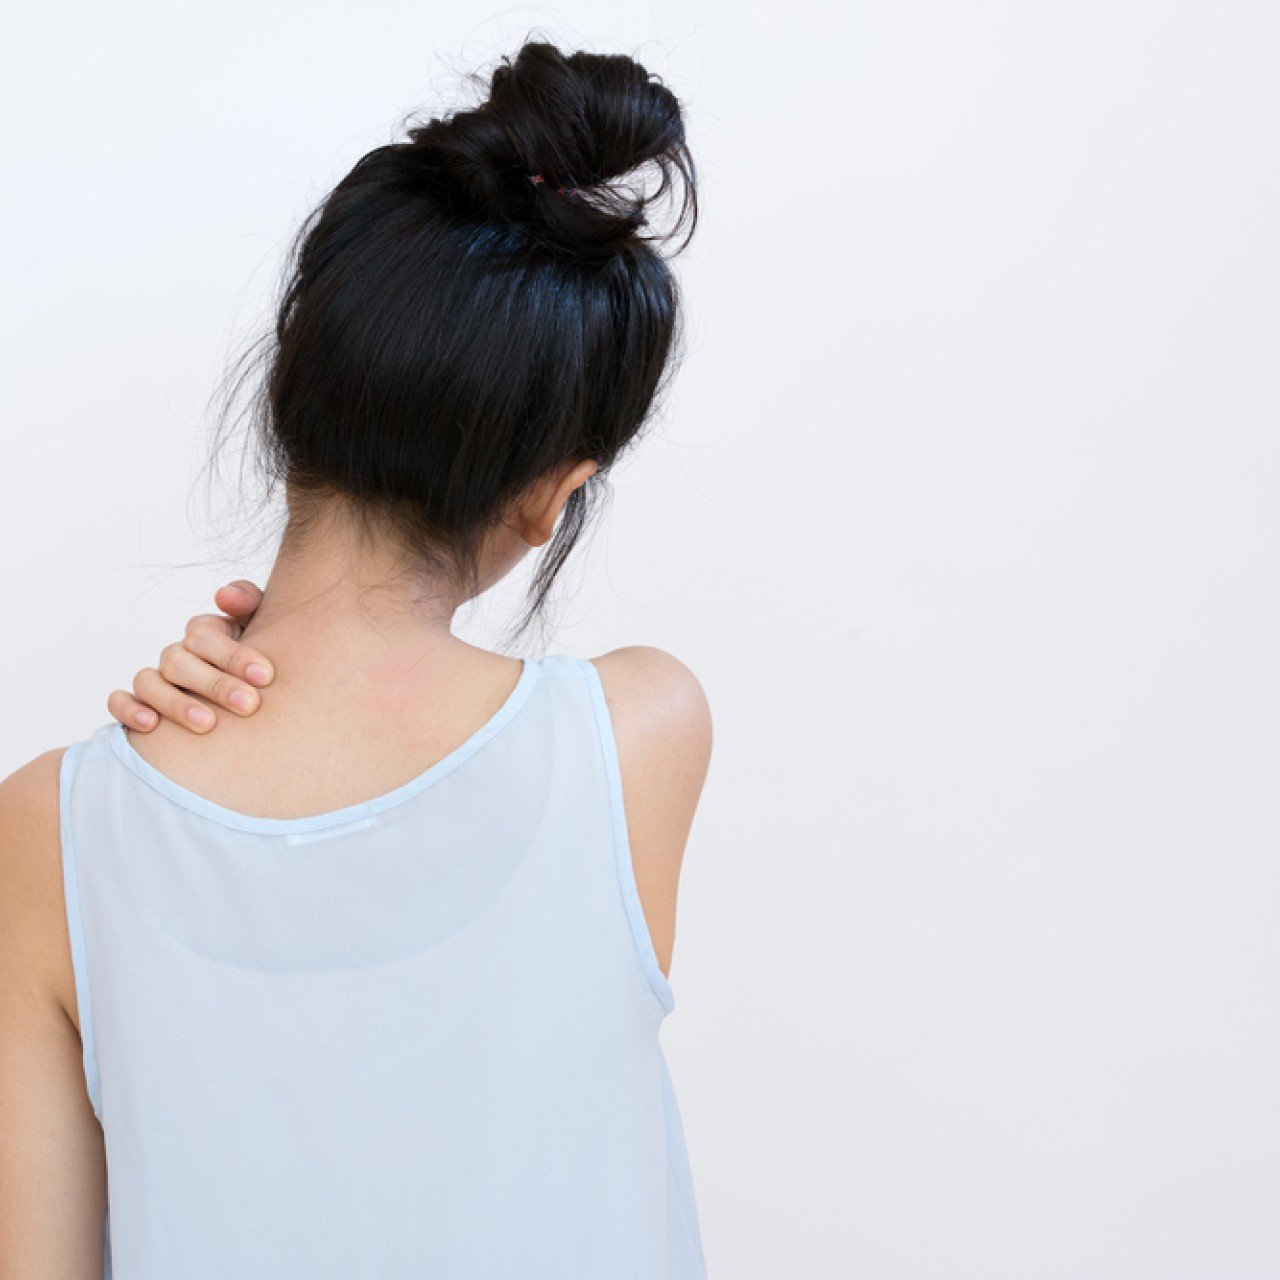 Improve Your Posture with These 4 Easy TIps- Lifestyle - Health Journal